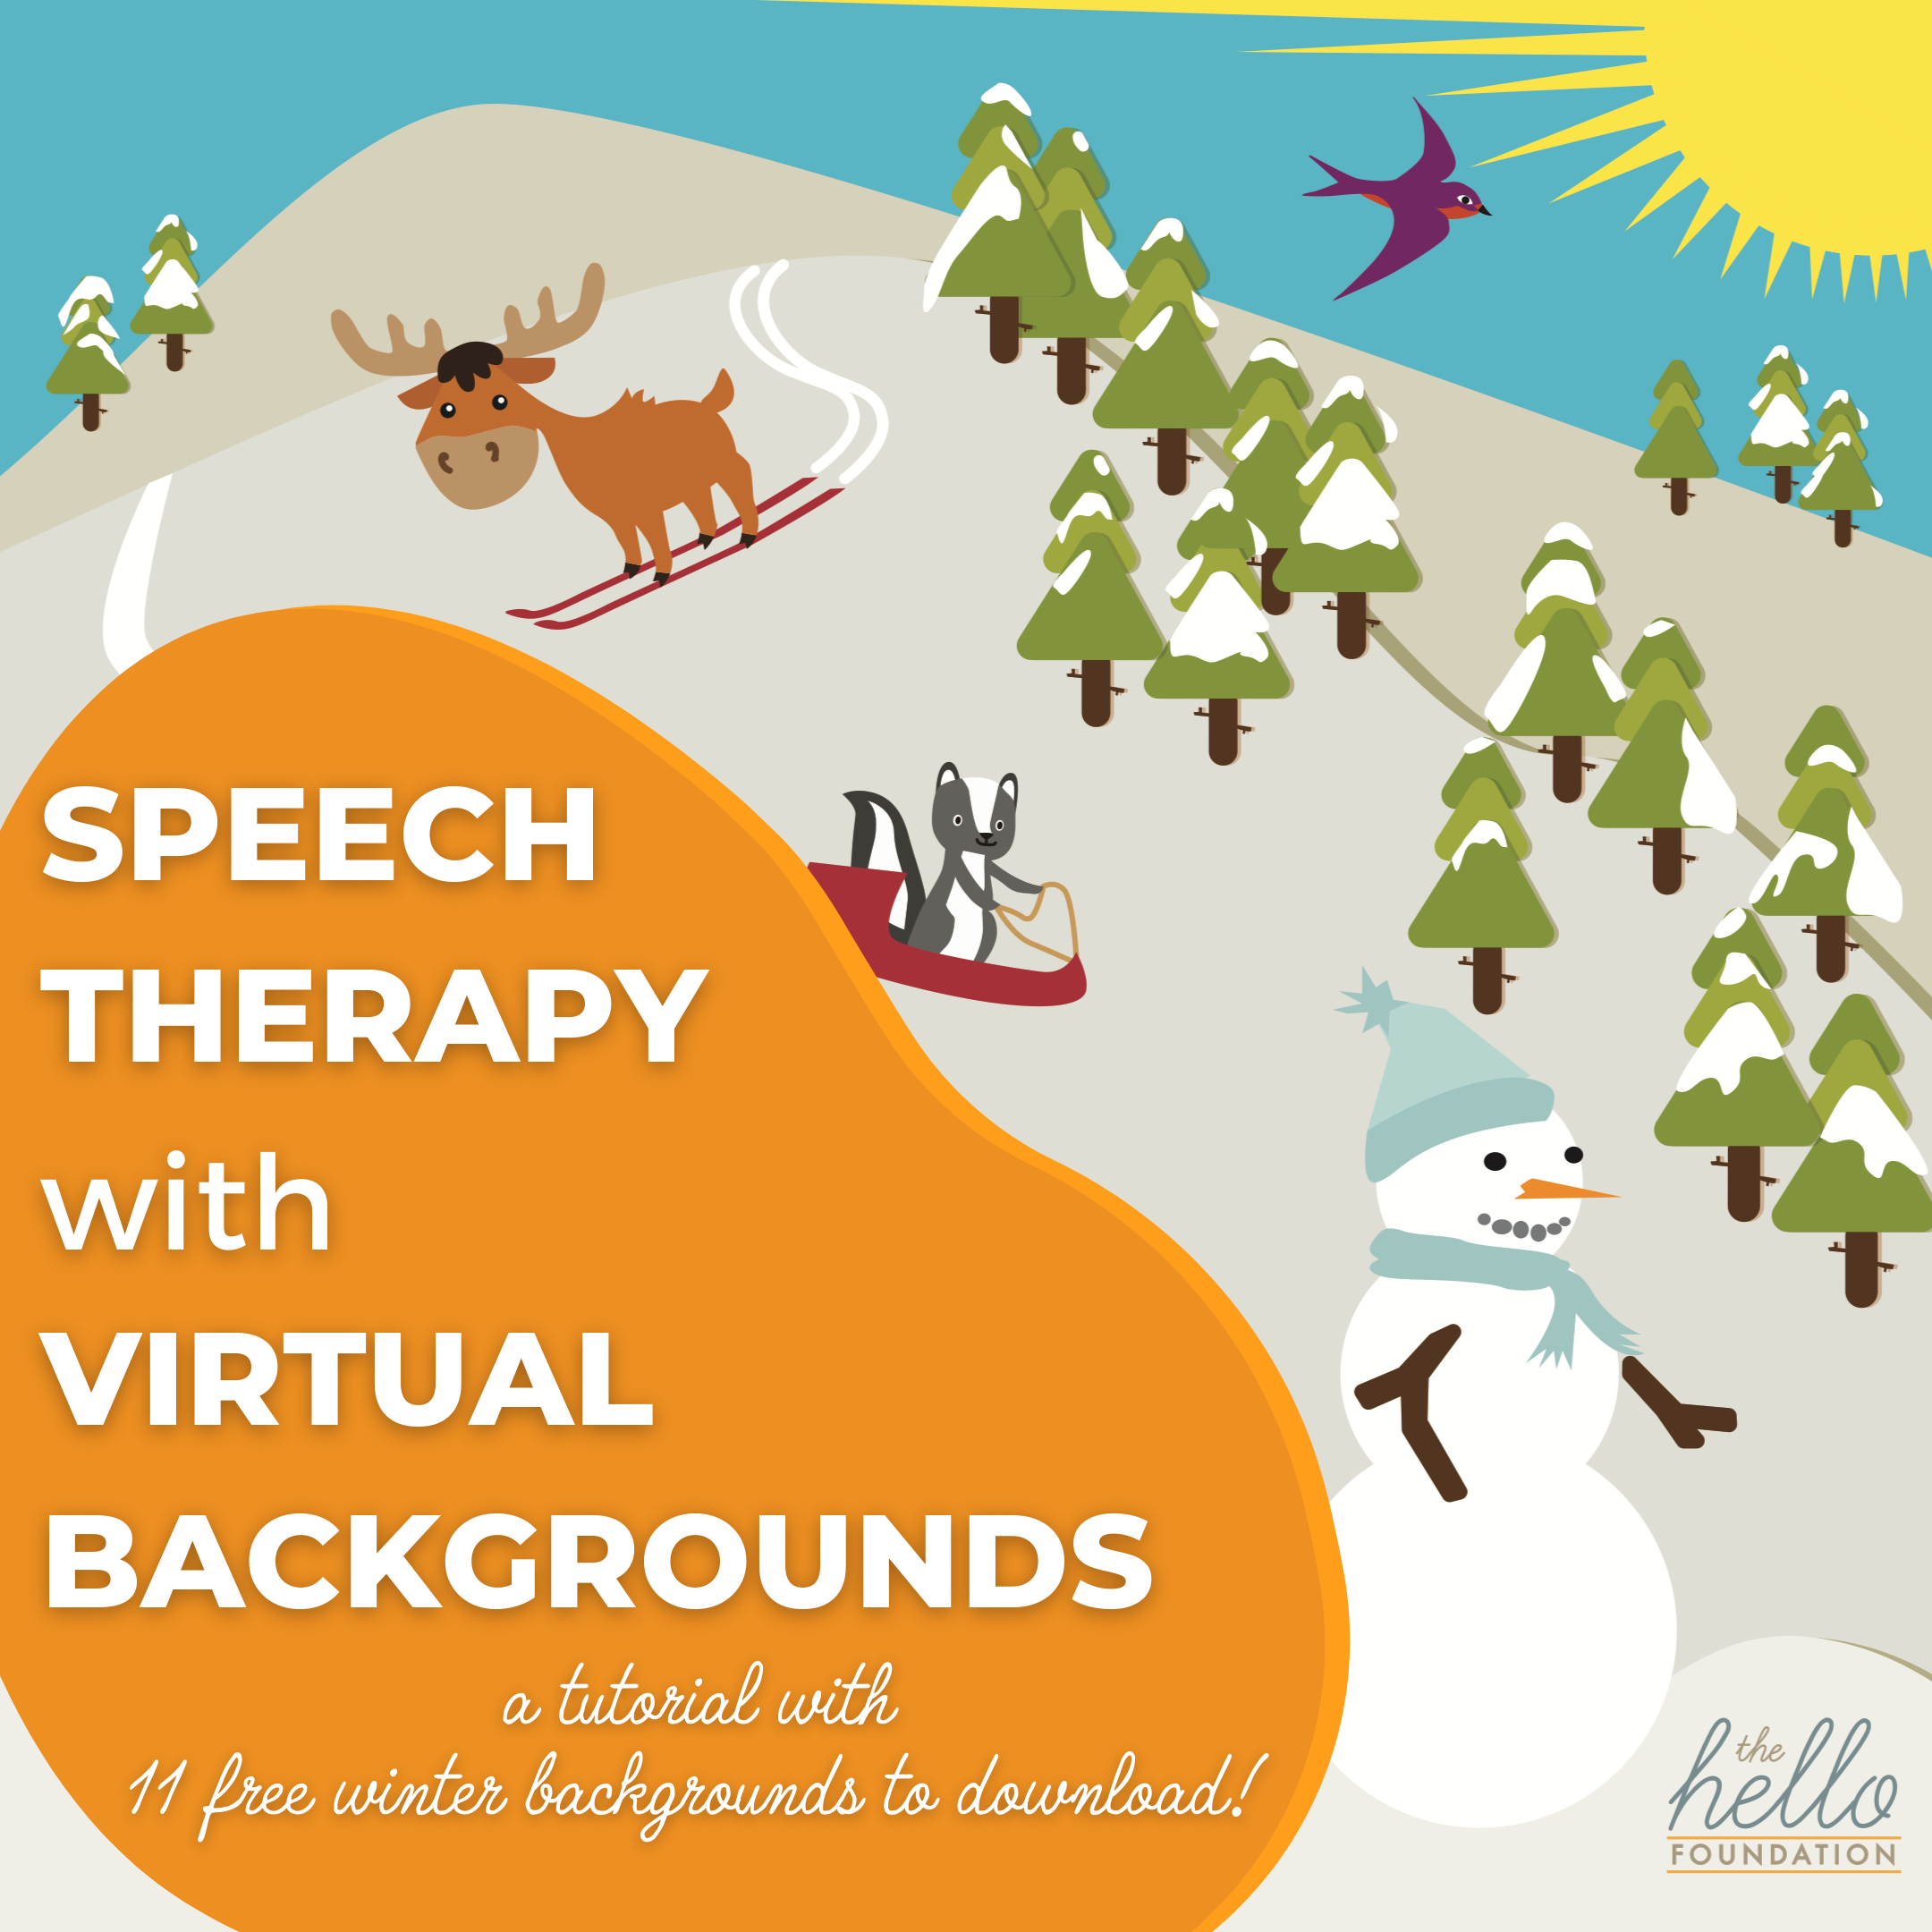 Speech Therapy with Virtual Backgrounds Tutorial